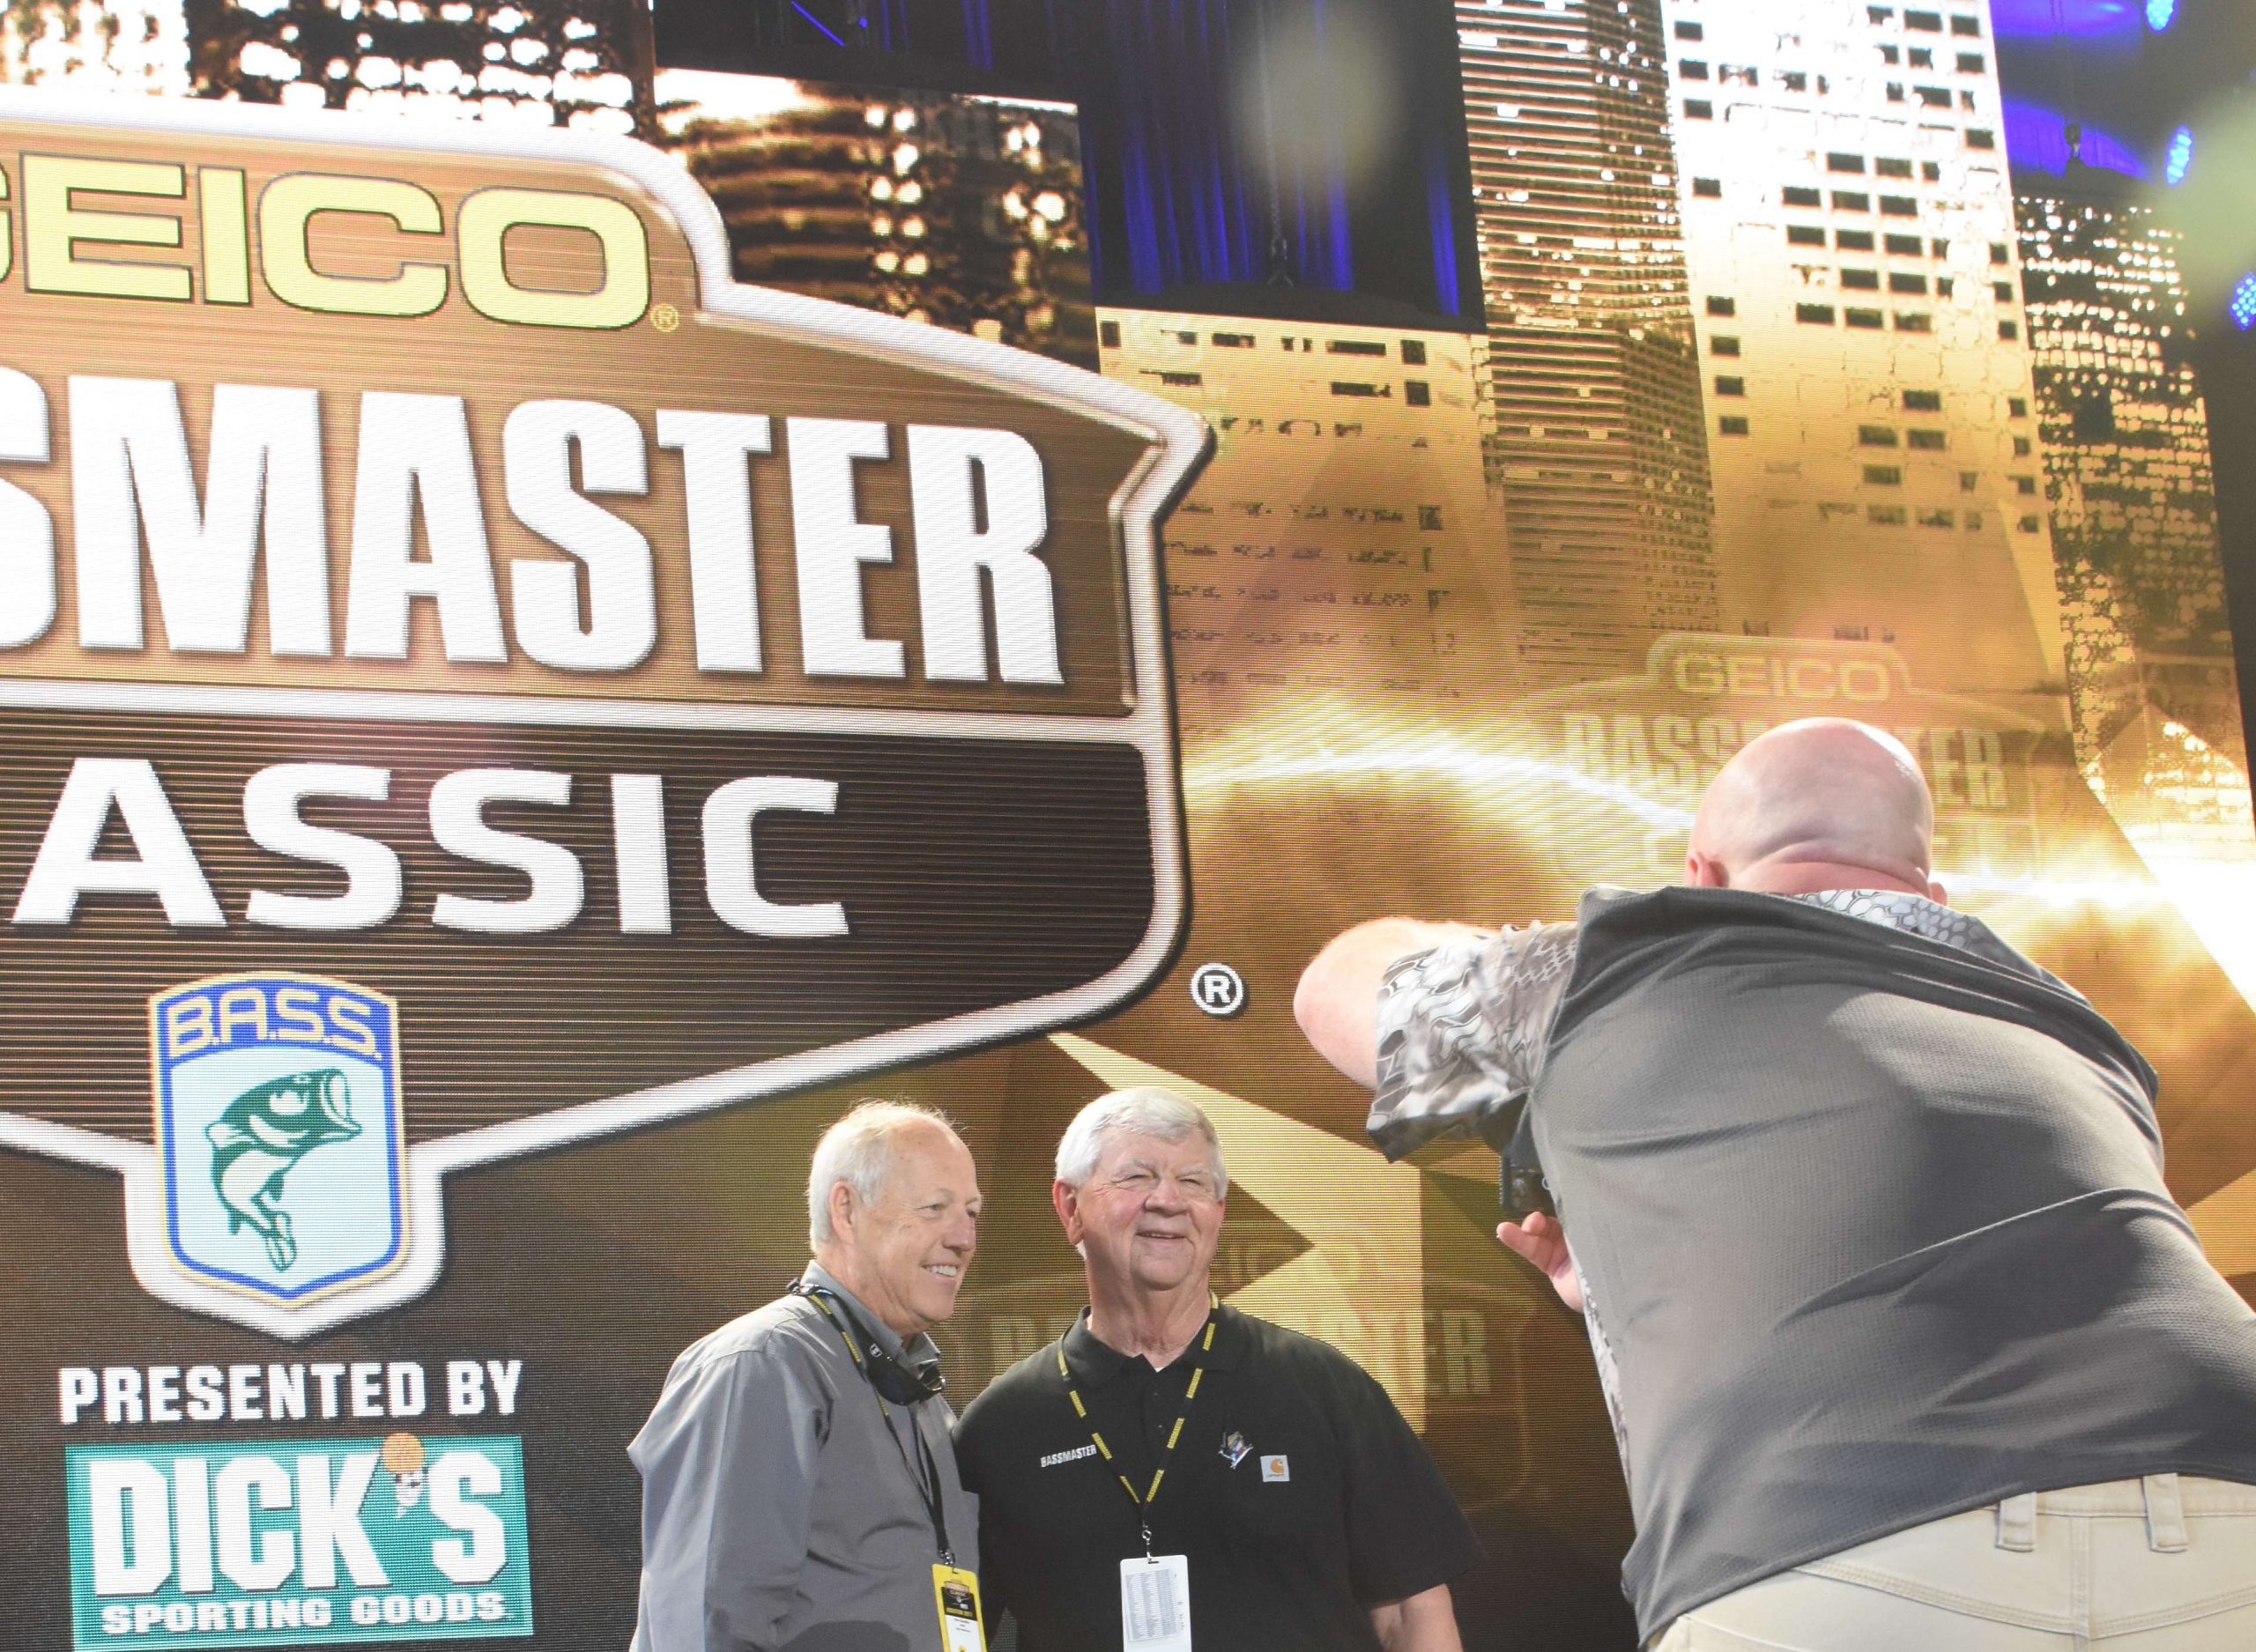 He was a fixture at the Bassmaster Classic. Here, he is pictured with Ron Guidice on the Classic stage prior to weigh-in.